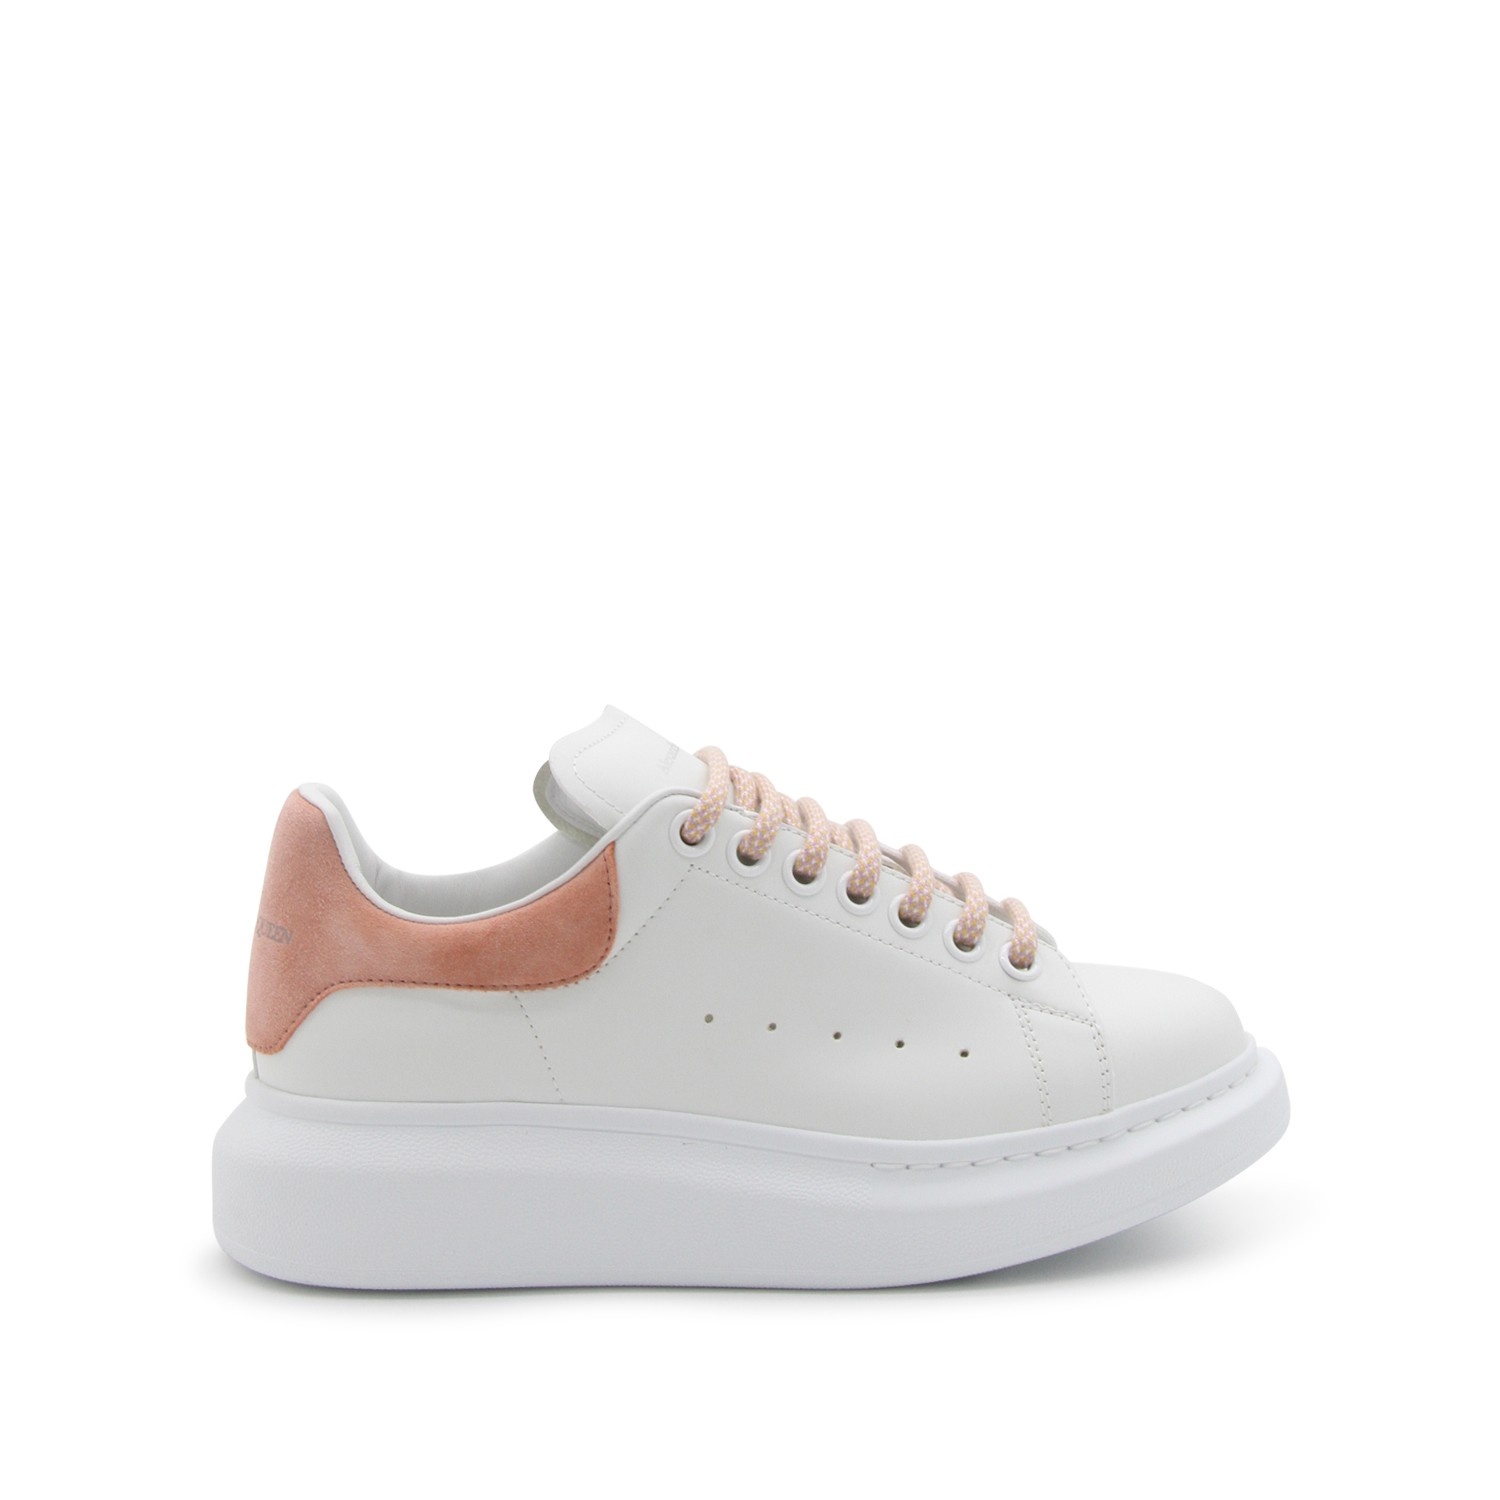 WHITE LEATHER AND PINK SUEDE OVERSIZED SNEAKERS - 1